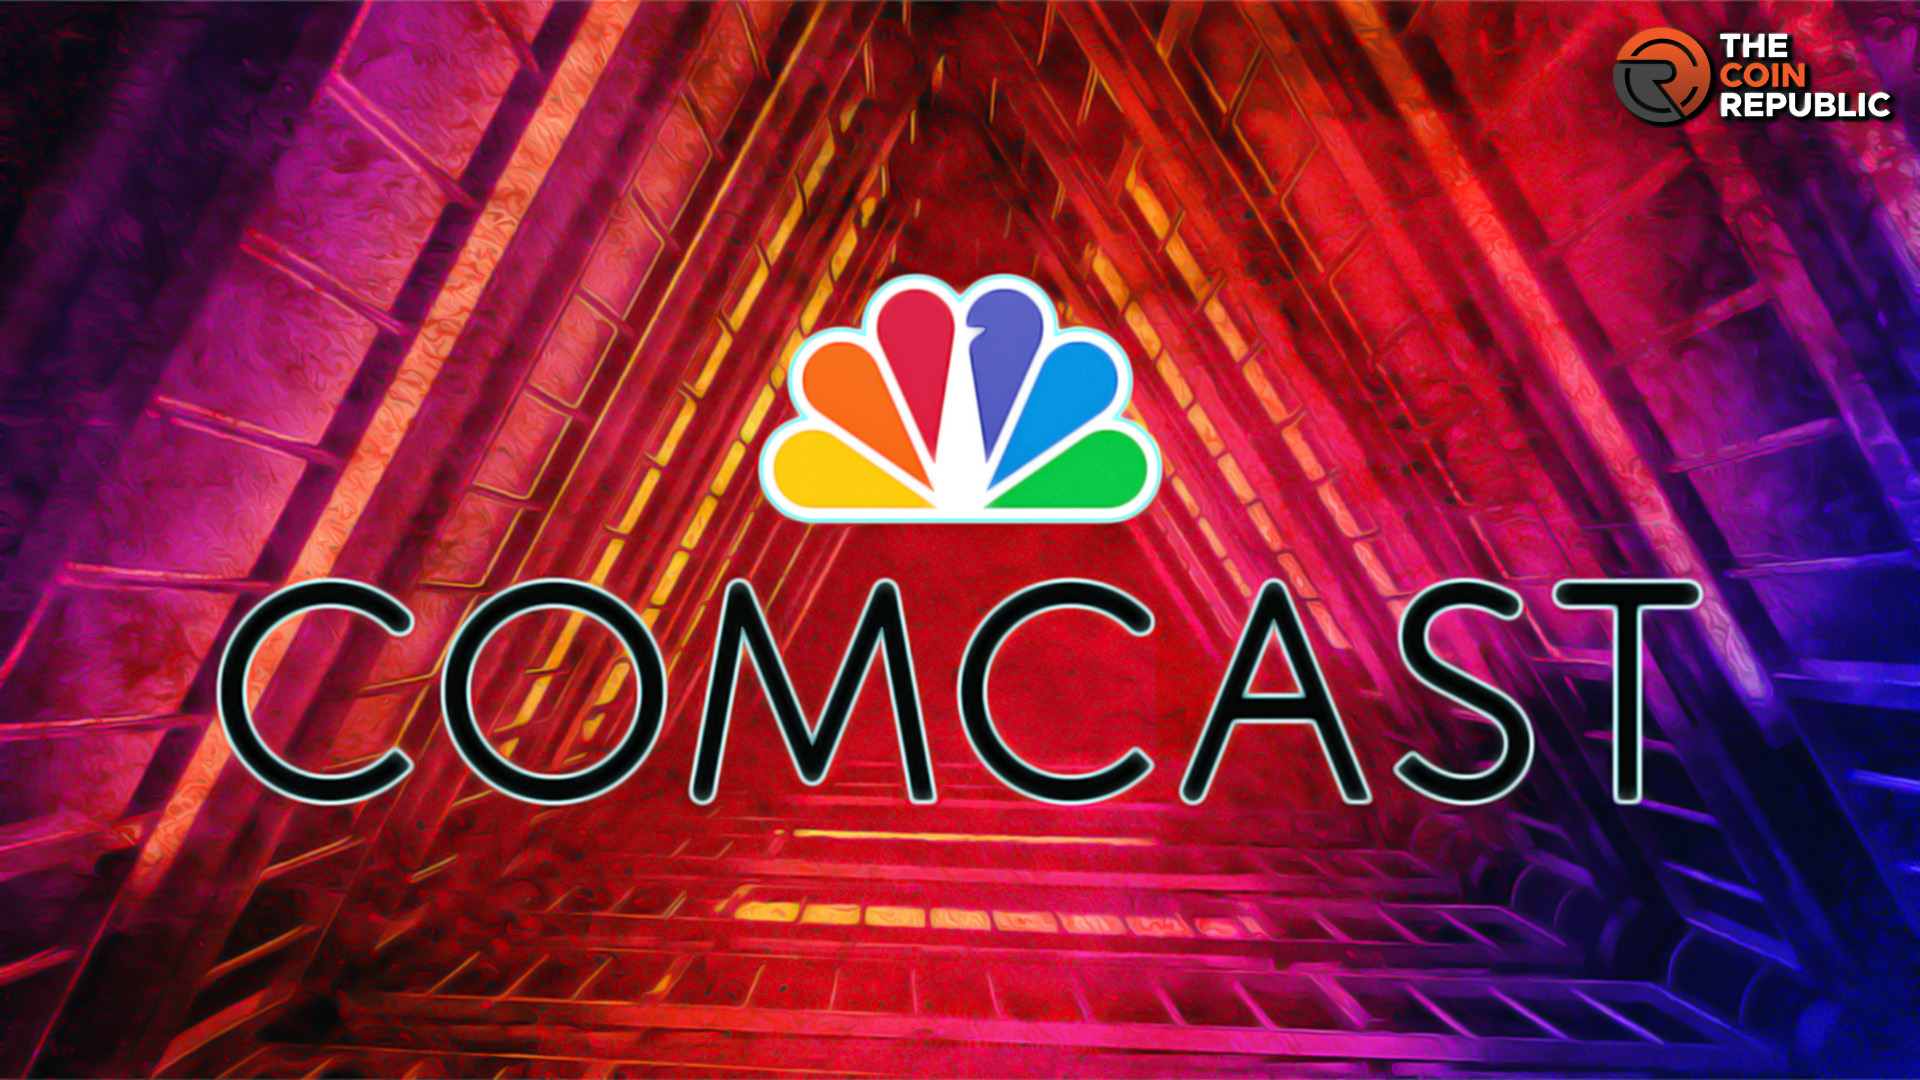 Comcast Price Prediction: Will CMCSA Stock Price Keep Surging?